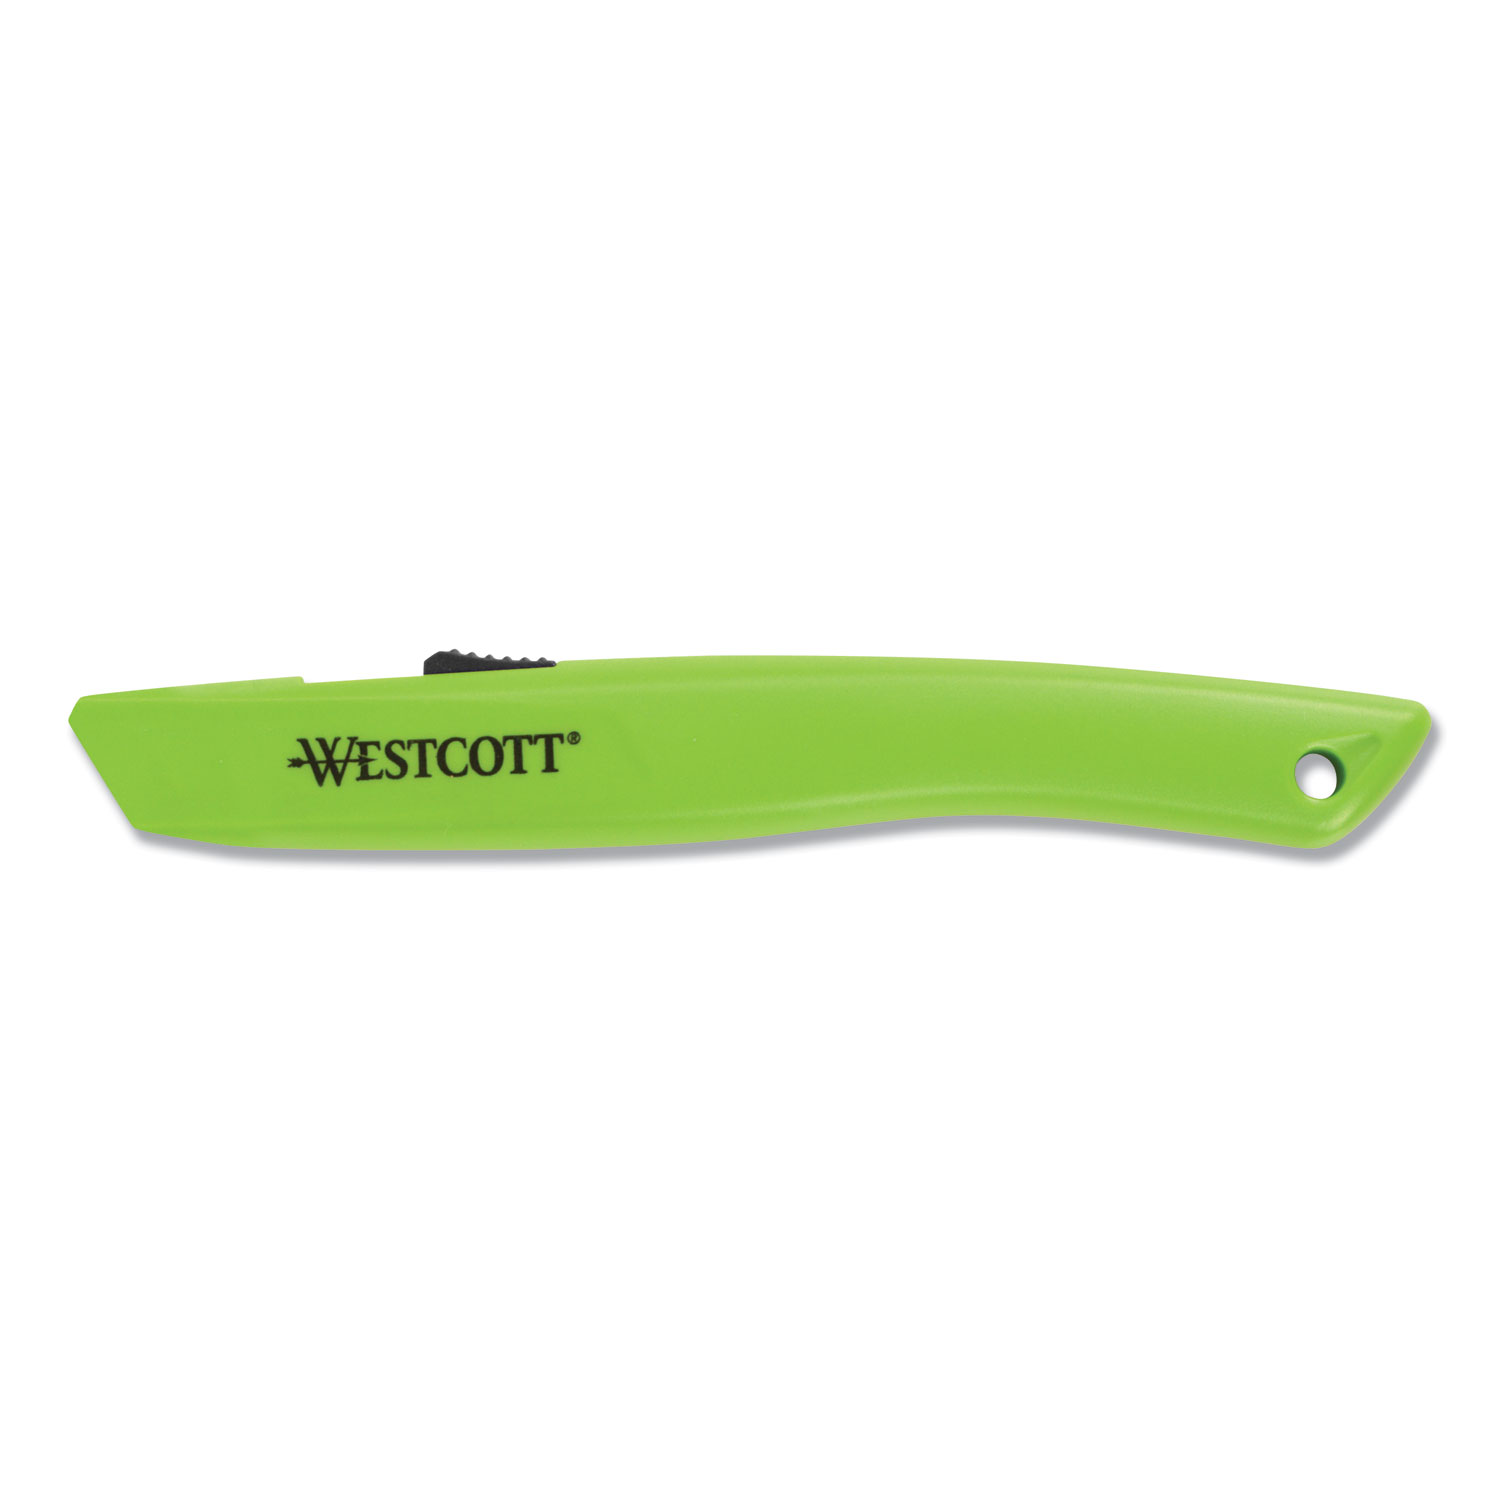 Easycut Self-Retracting Cutter with Safety-Tip Blade and Holster